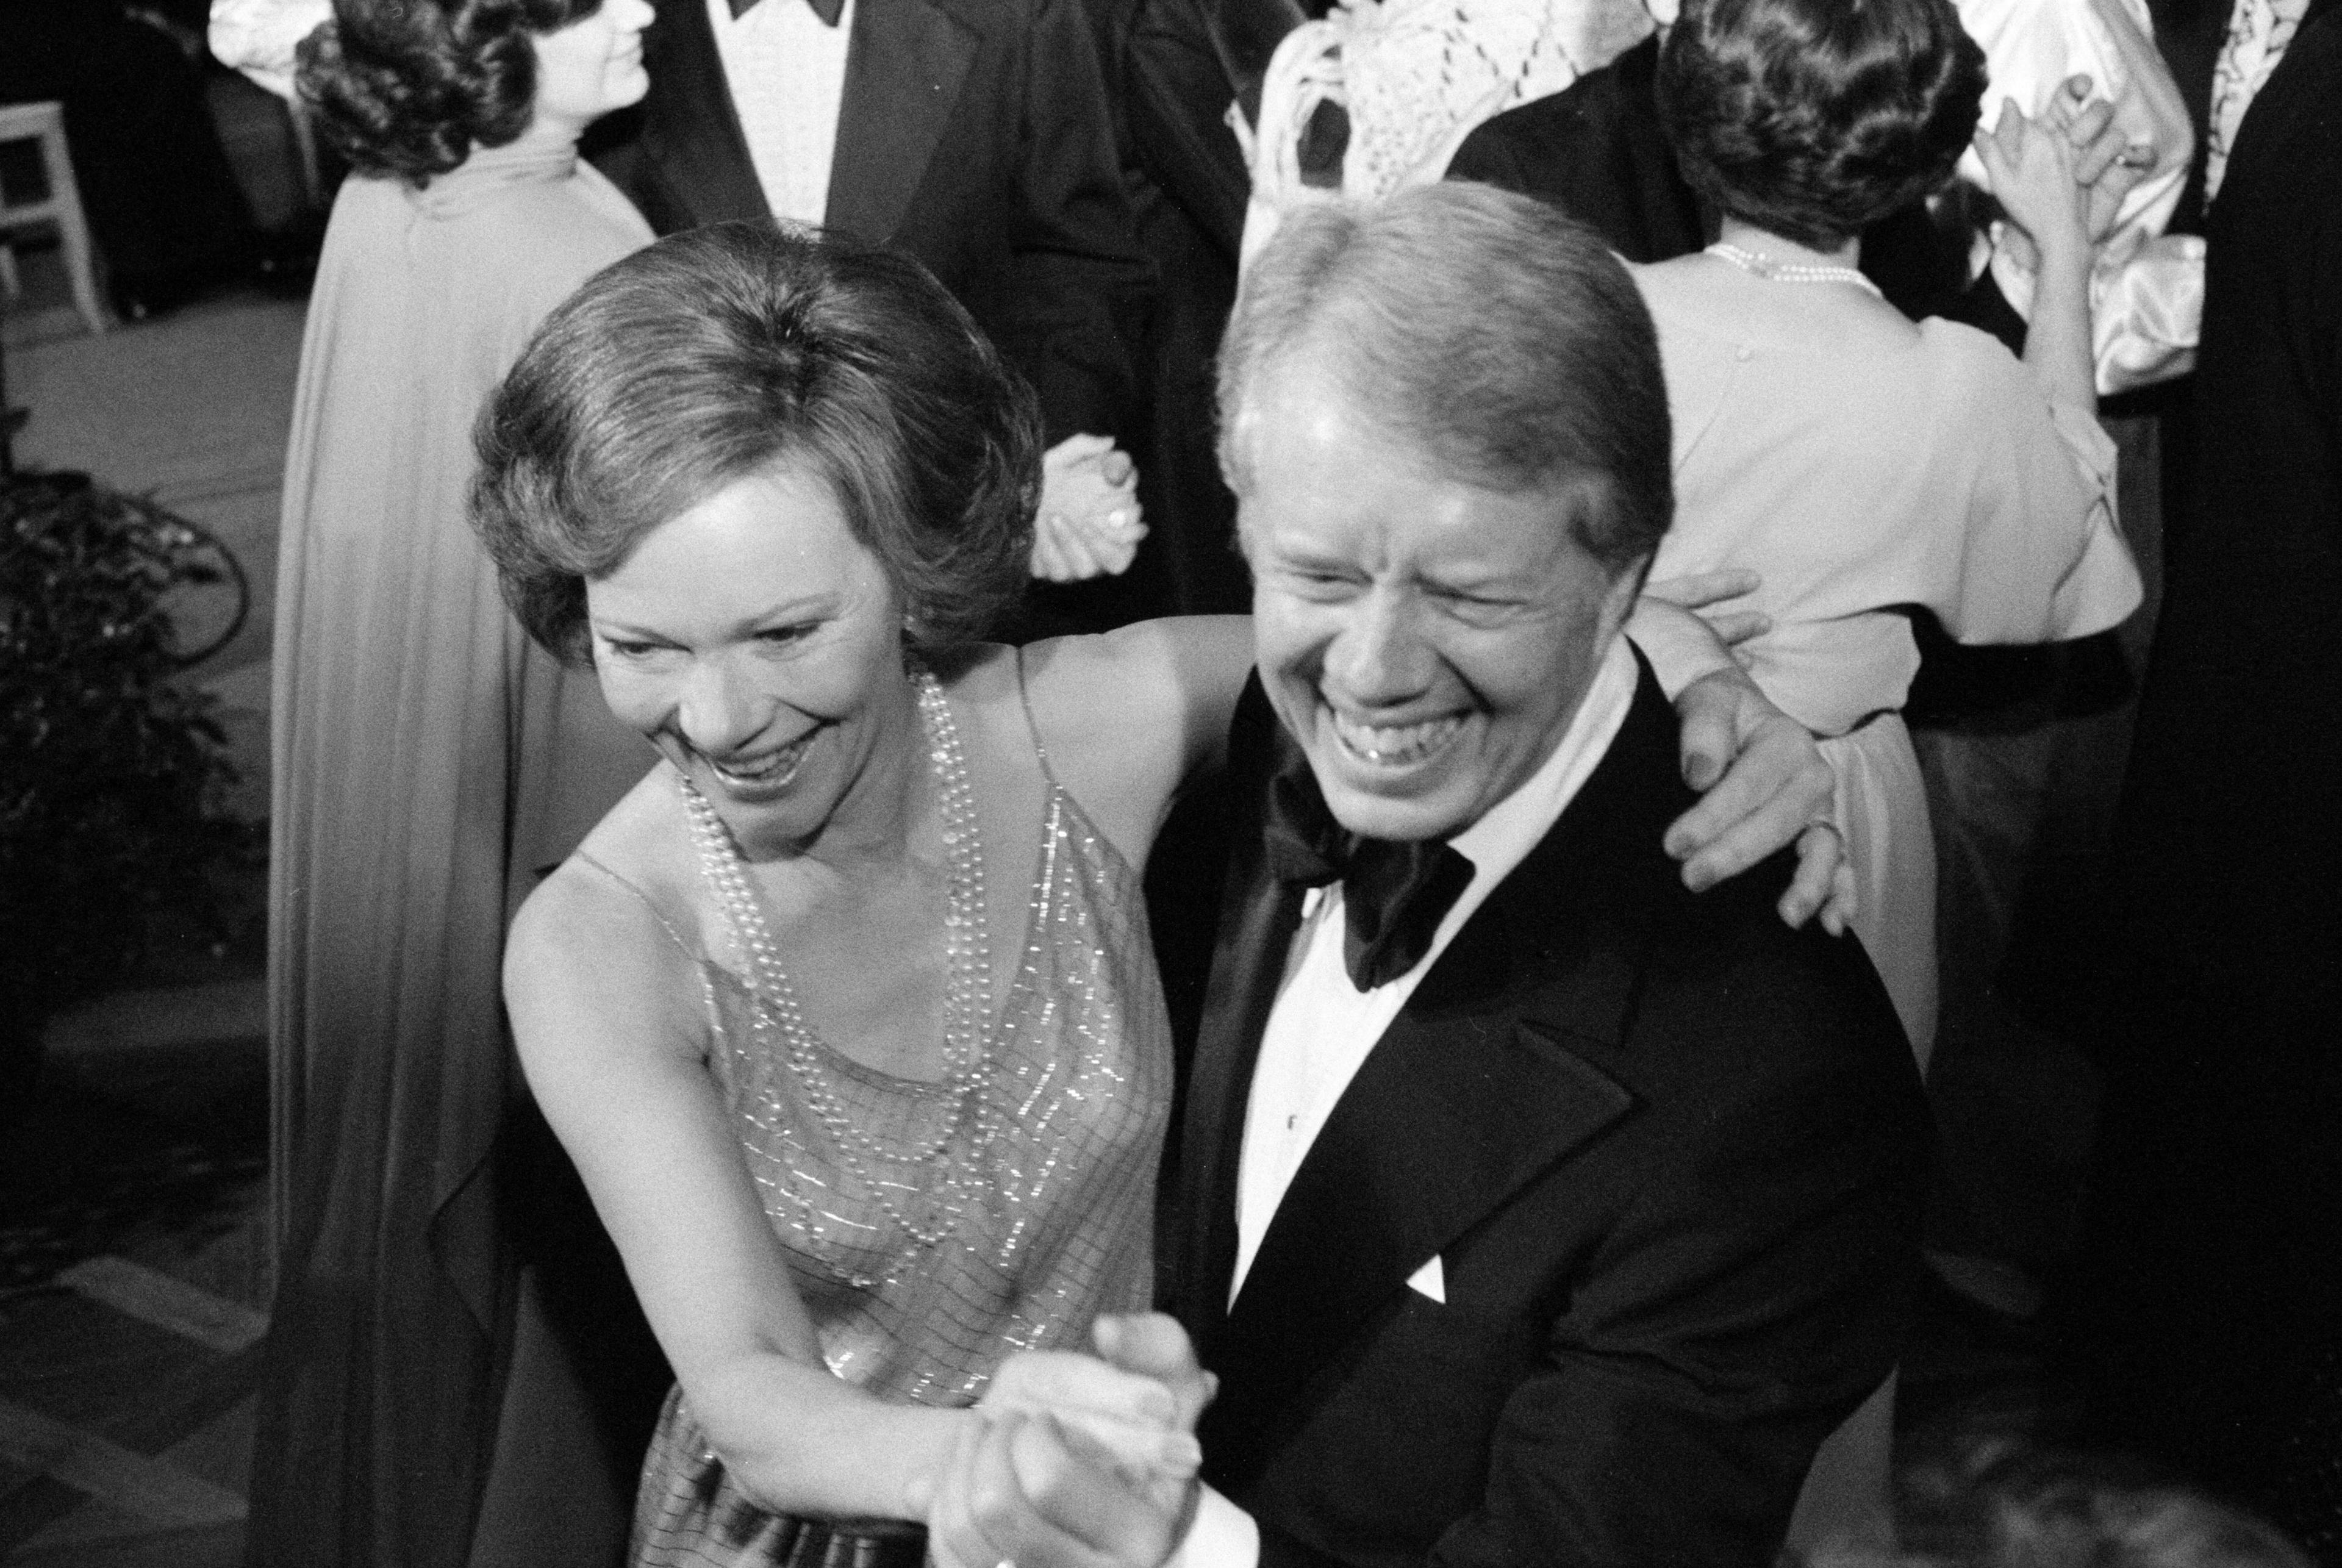 The beautiful story behind the 75-year marriage of Jimmy and Rosalynn Carter